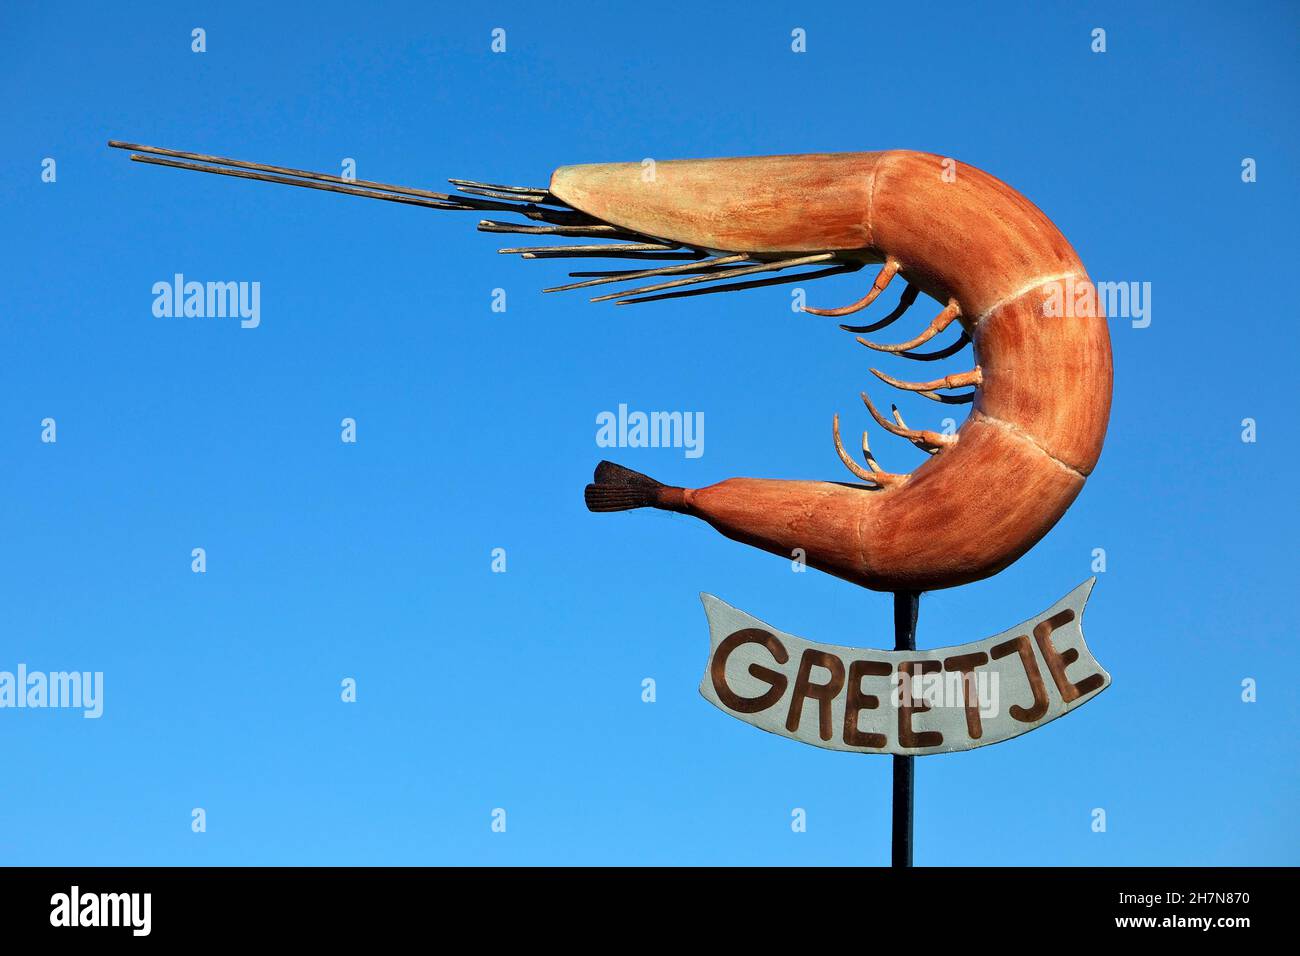 The sculpture of the North Sea crab Greetje at the fishing harbour against a blue sky, Greetsiel, East Frisia, Lower Saxony, Germany Stock Photo